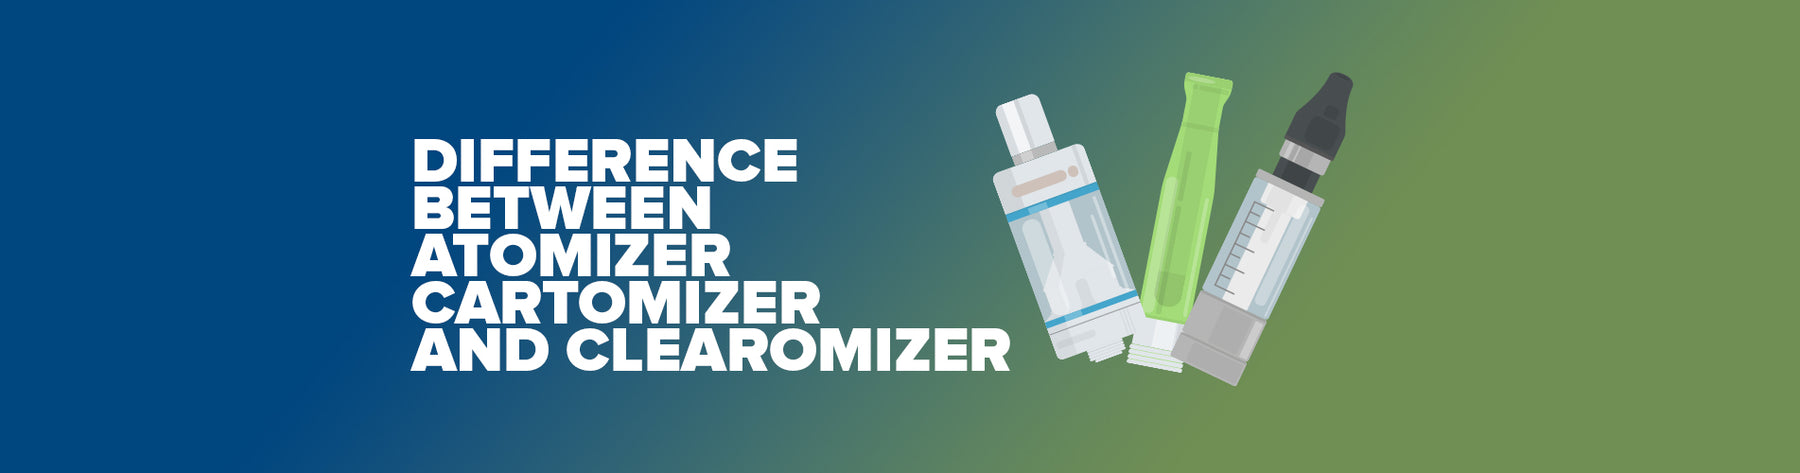 Difference between Atomizer Cartomizer and Clearomizer